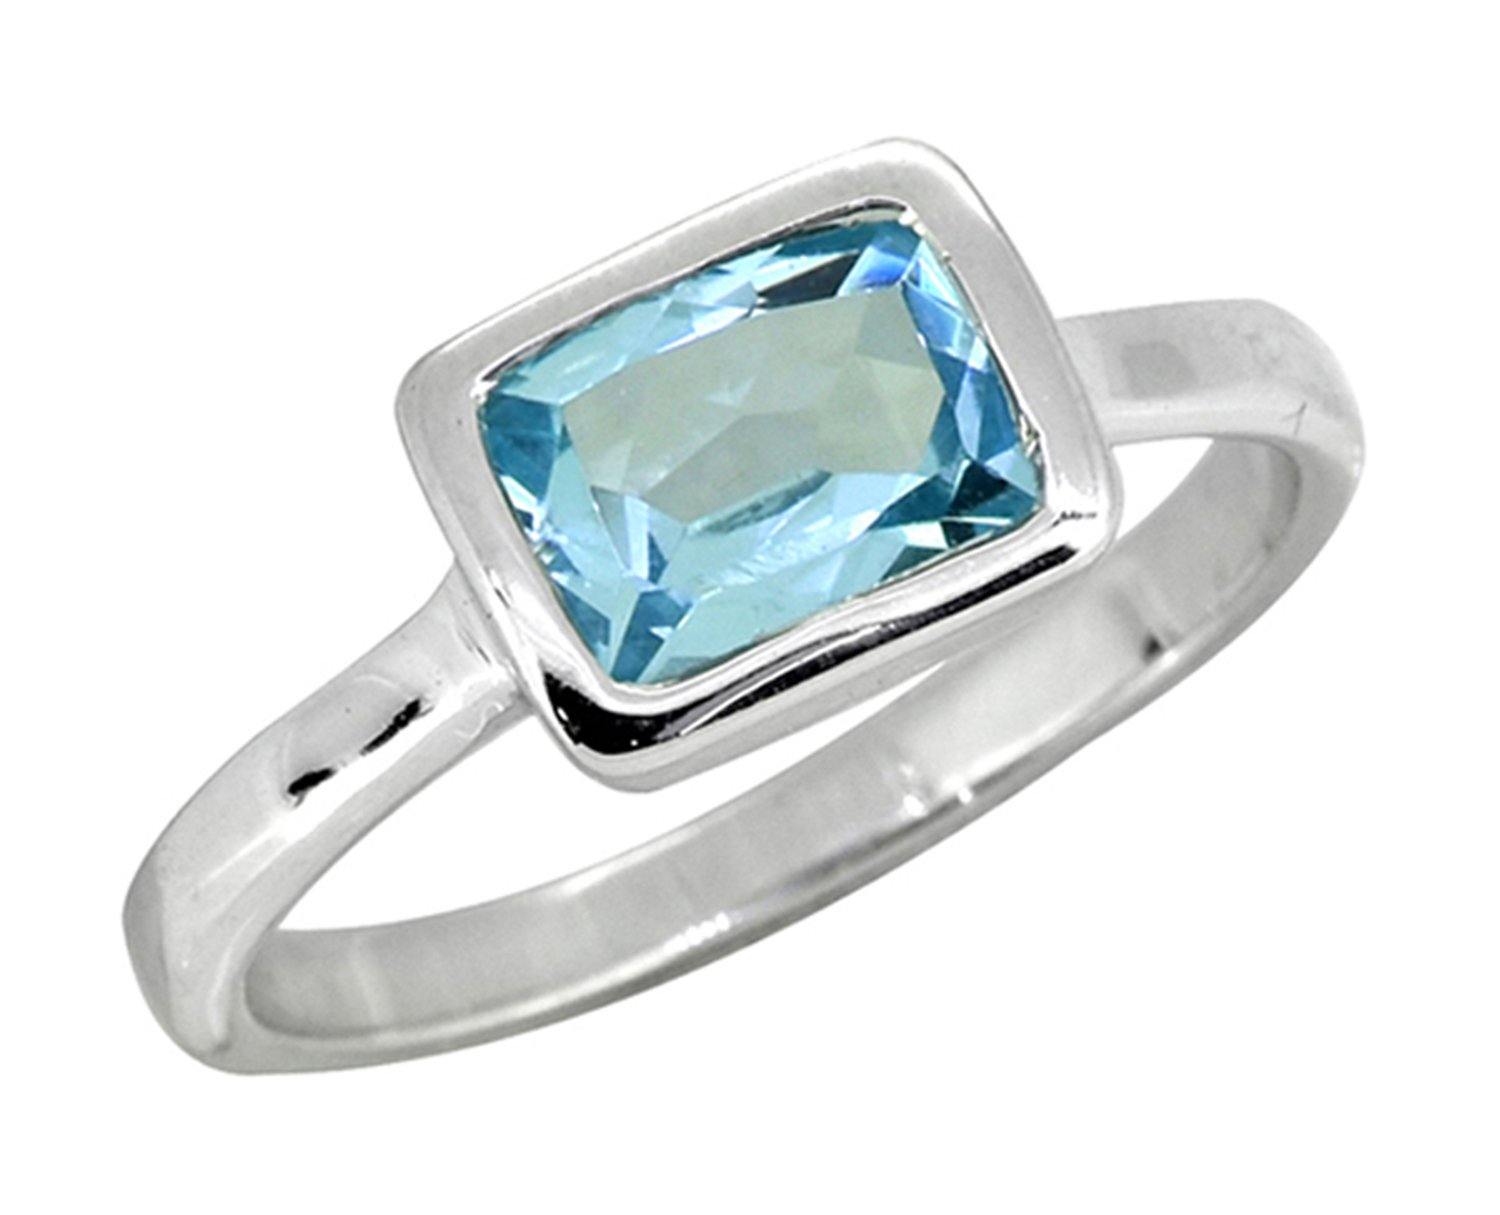 1.74 Ct. Blue Topaz Solid 925 Sterling Silver Ring Jewelry - YoTreasure